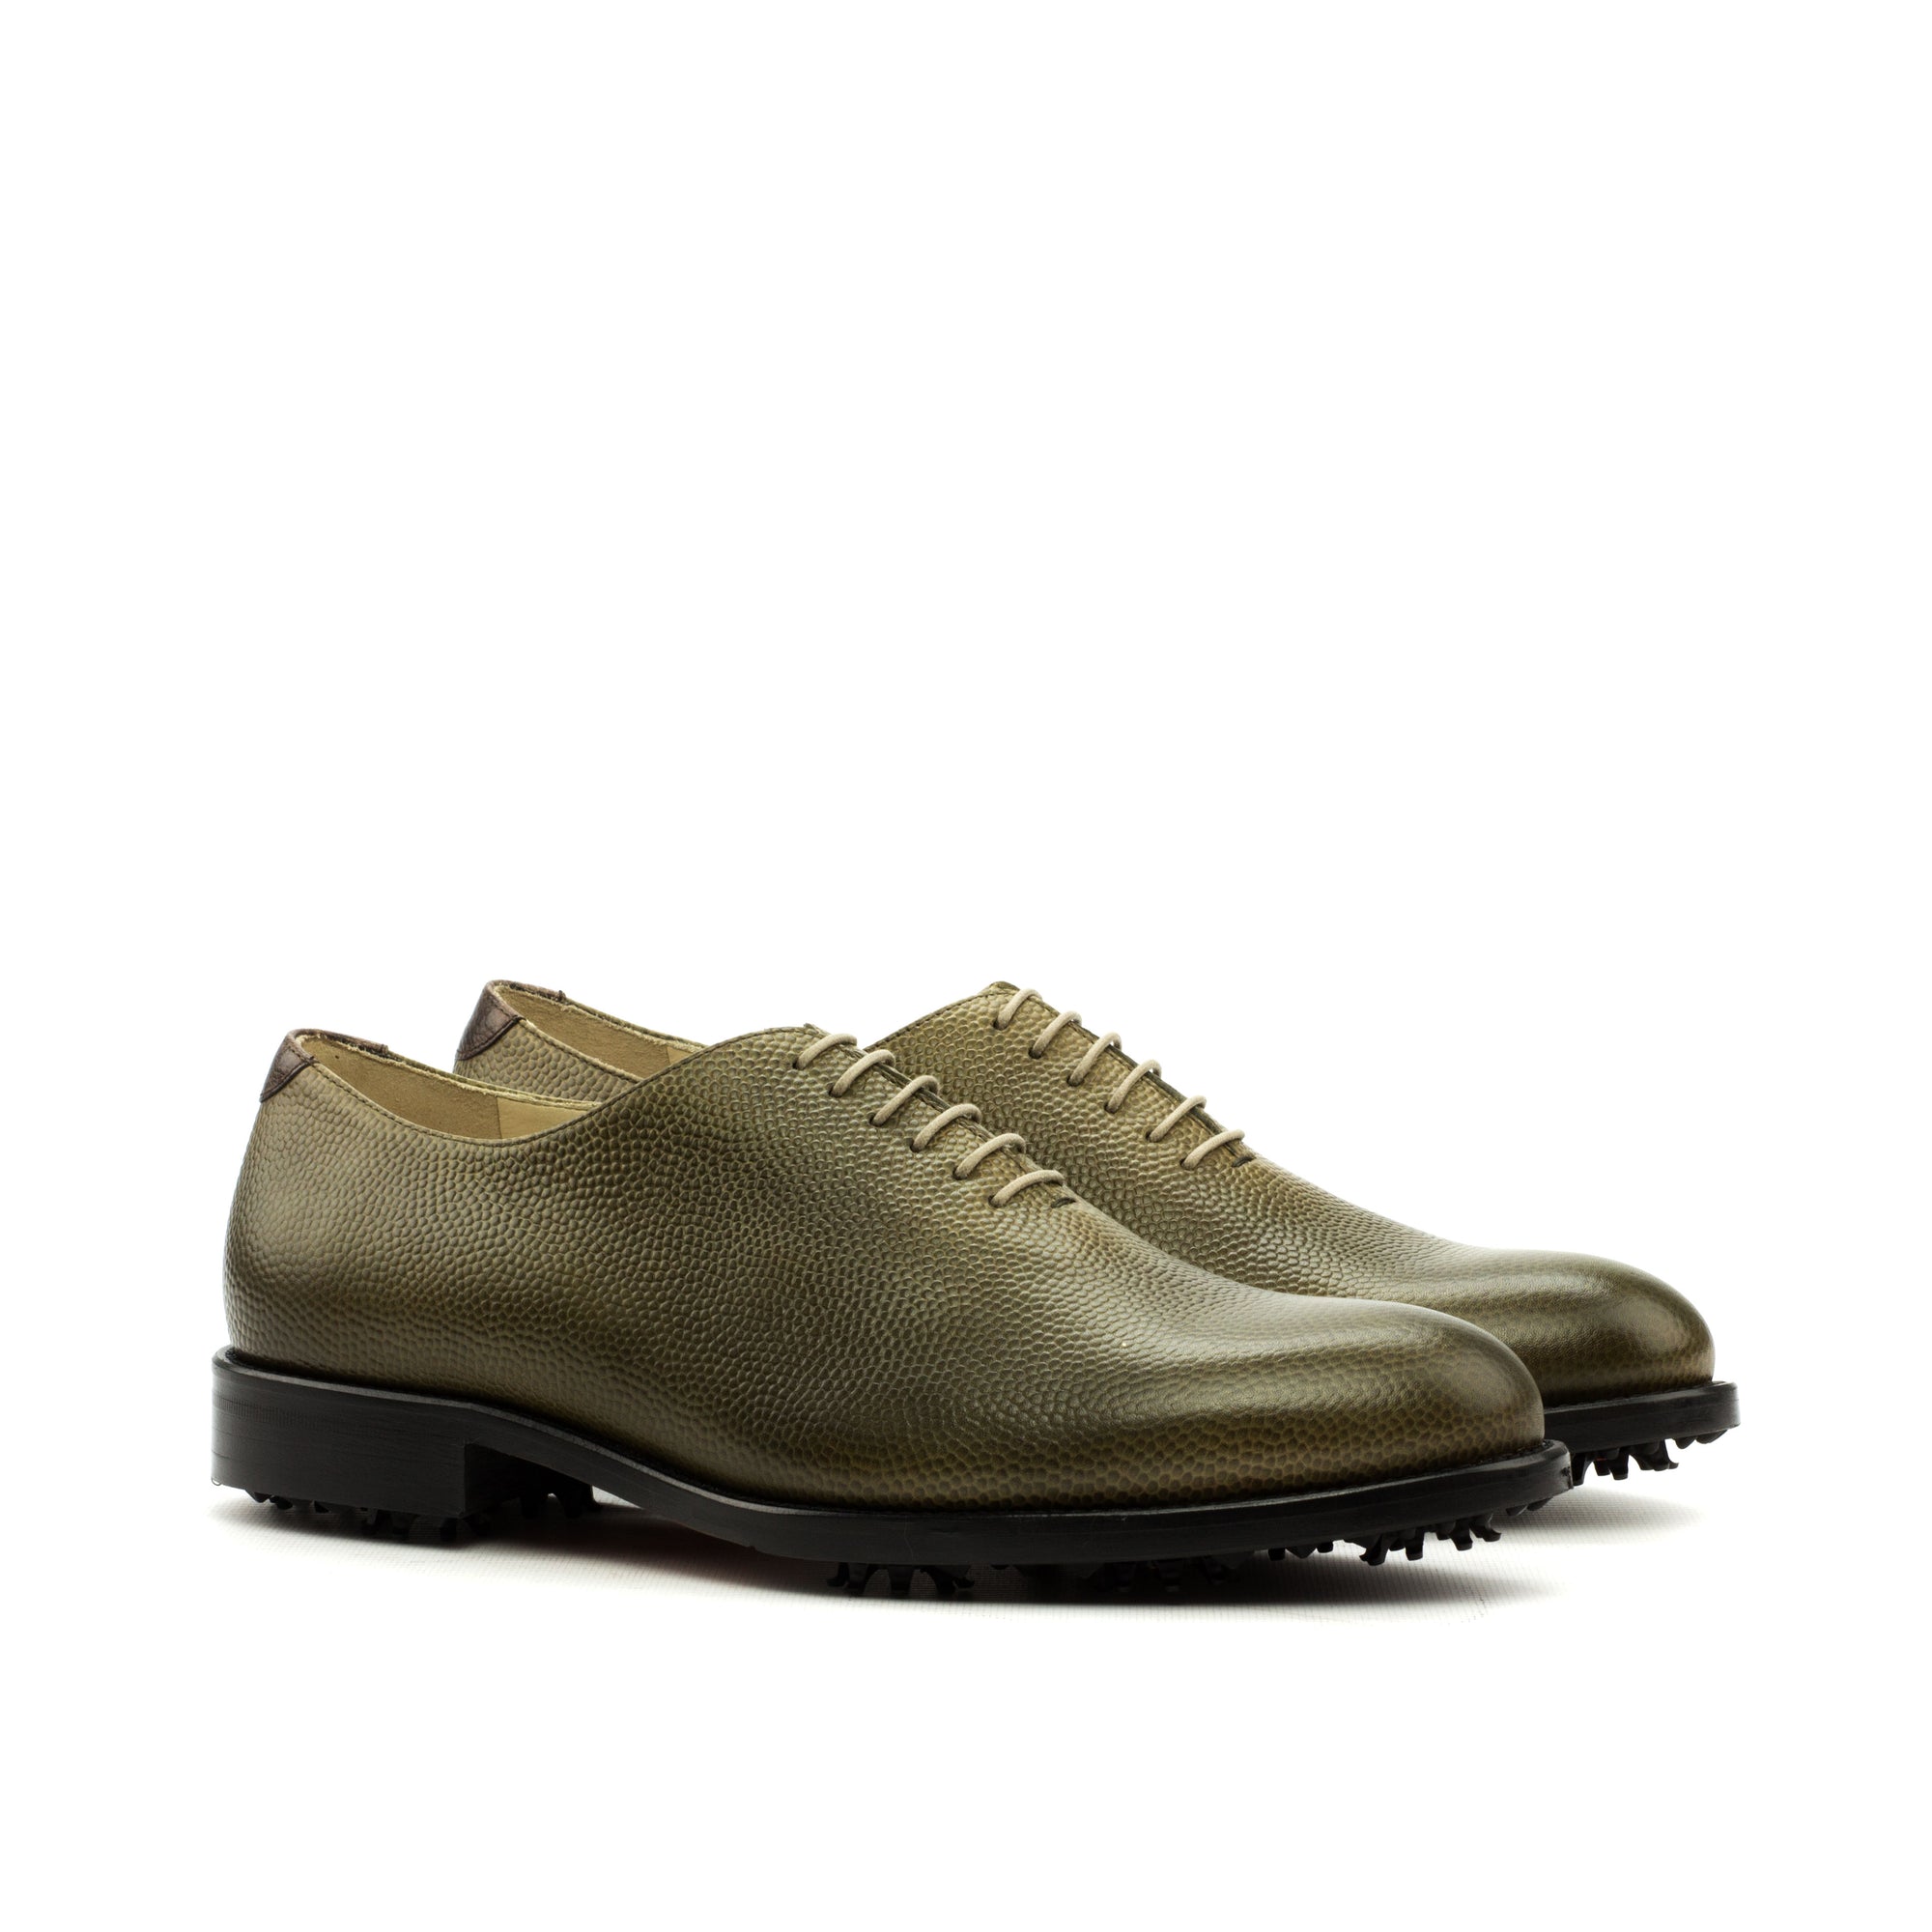 Up to size US 17!  Golf Shoes, Whole Cut Pebble Green